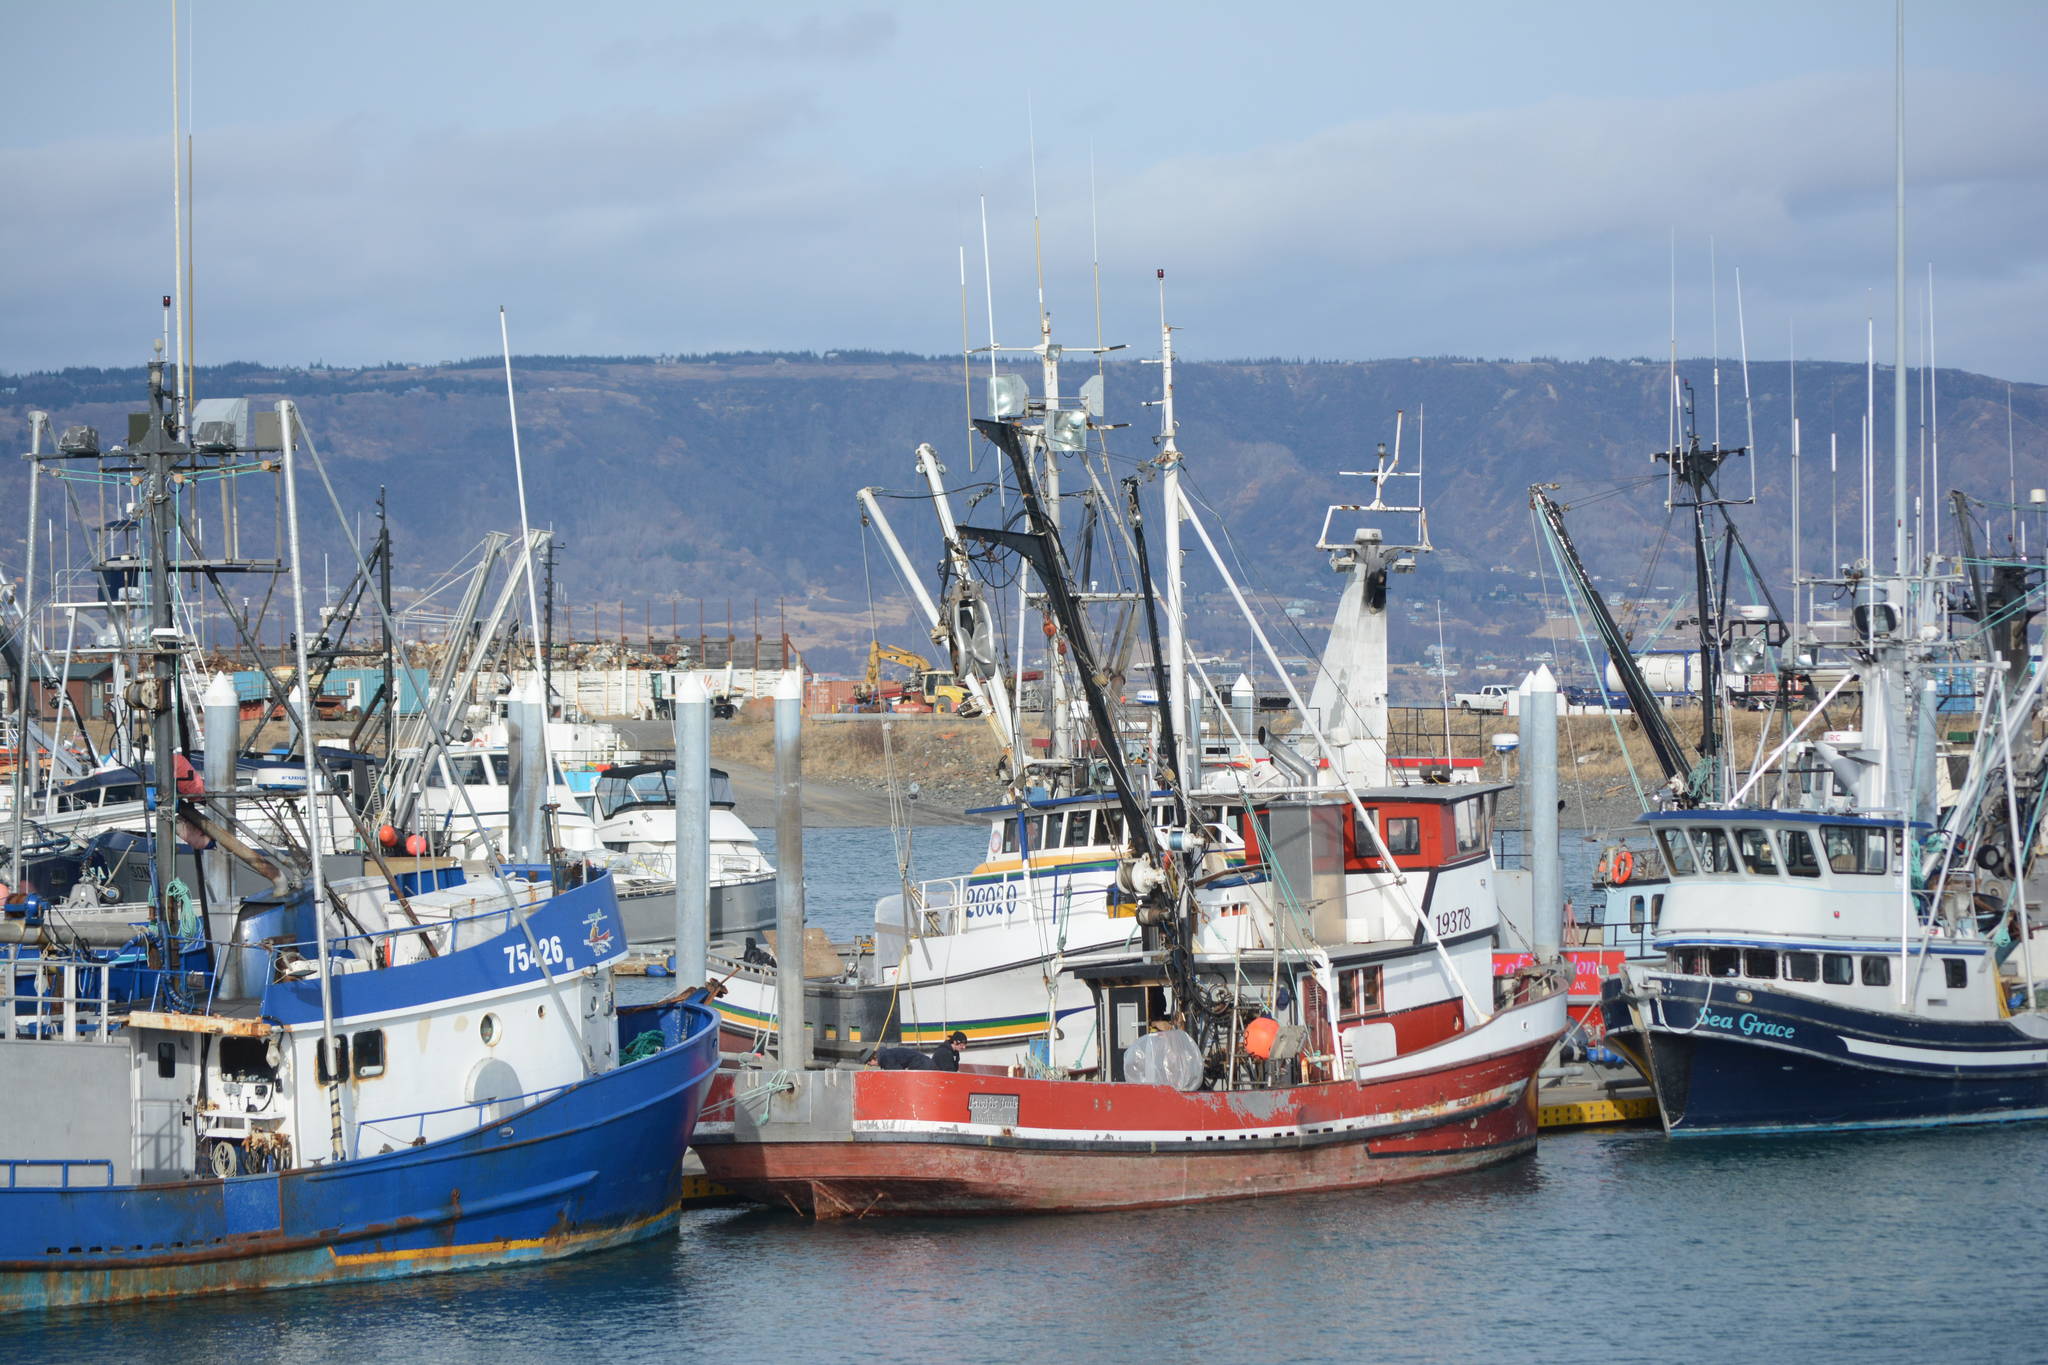 Seawatch: North Council looks to tie bycatch to halibut abundance